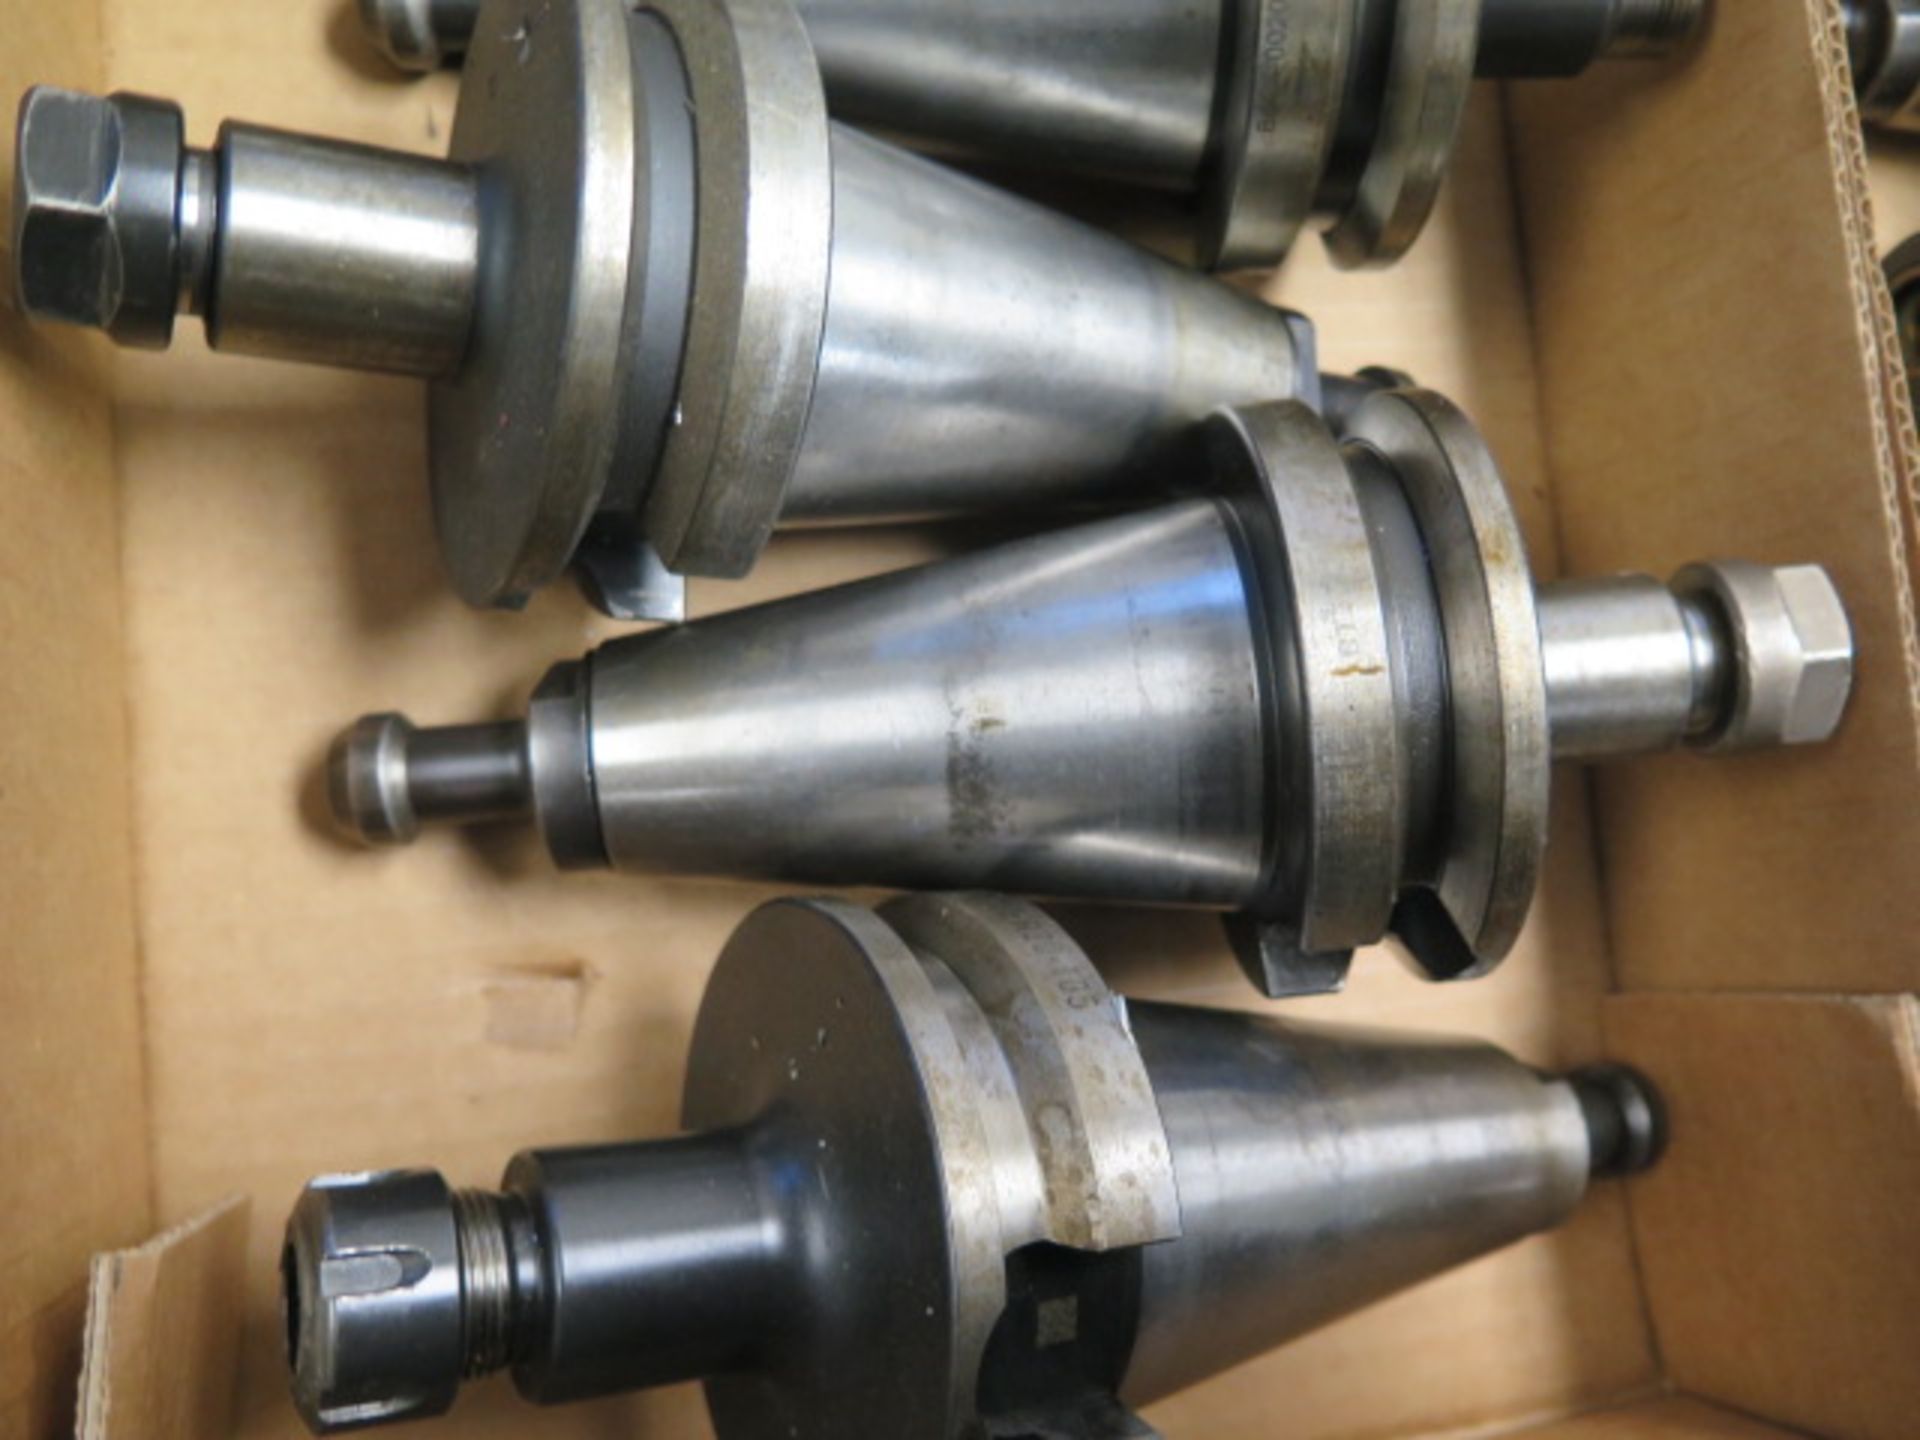 BT-50 Taper ER20 Collet Chucks (5) (SOLD AS-IS - NO WARRANTY) (Located @ 2229 Ringwood Ave. San Jose - Image 3 of 5